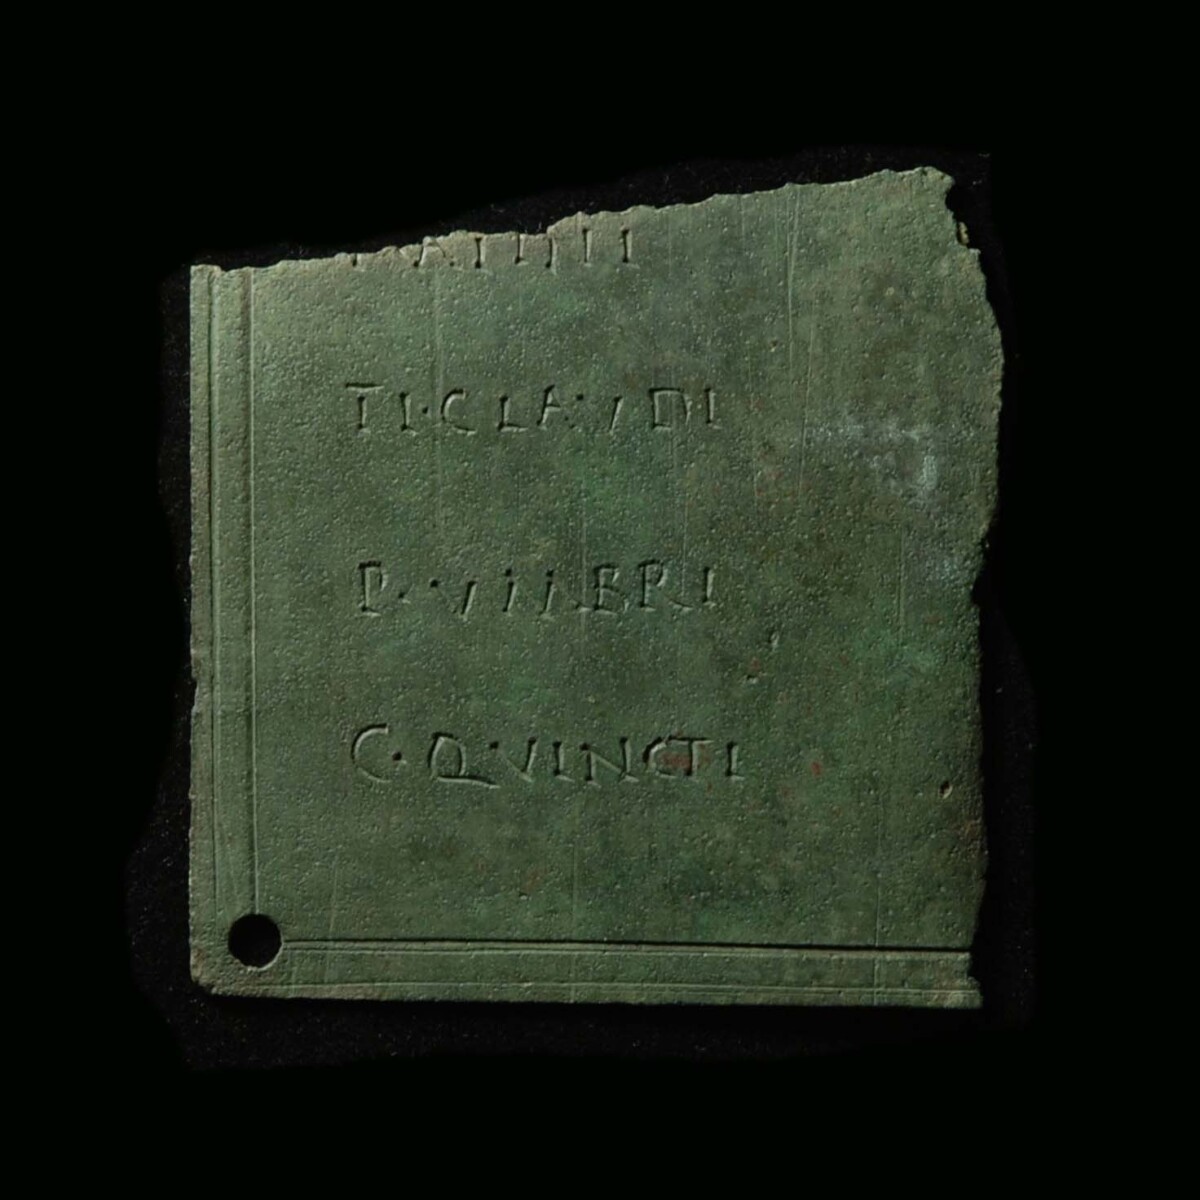 Roman military diploma from Moesia inferior B